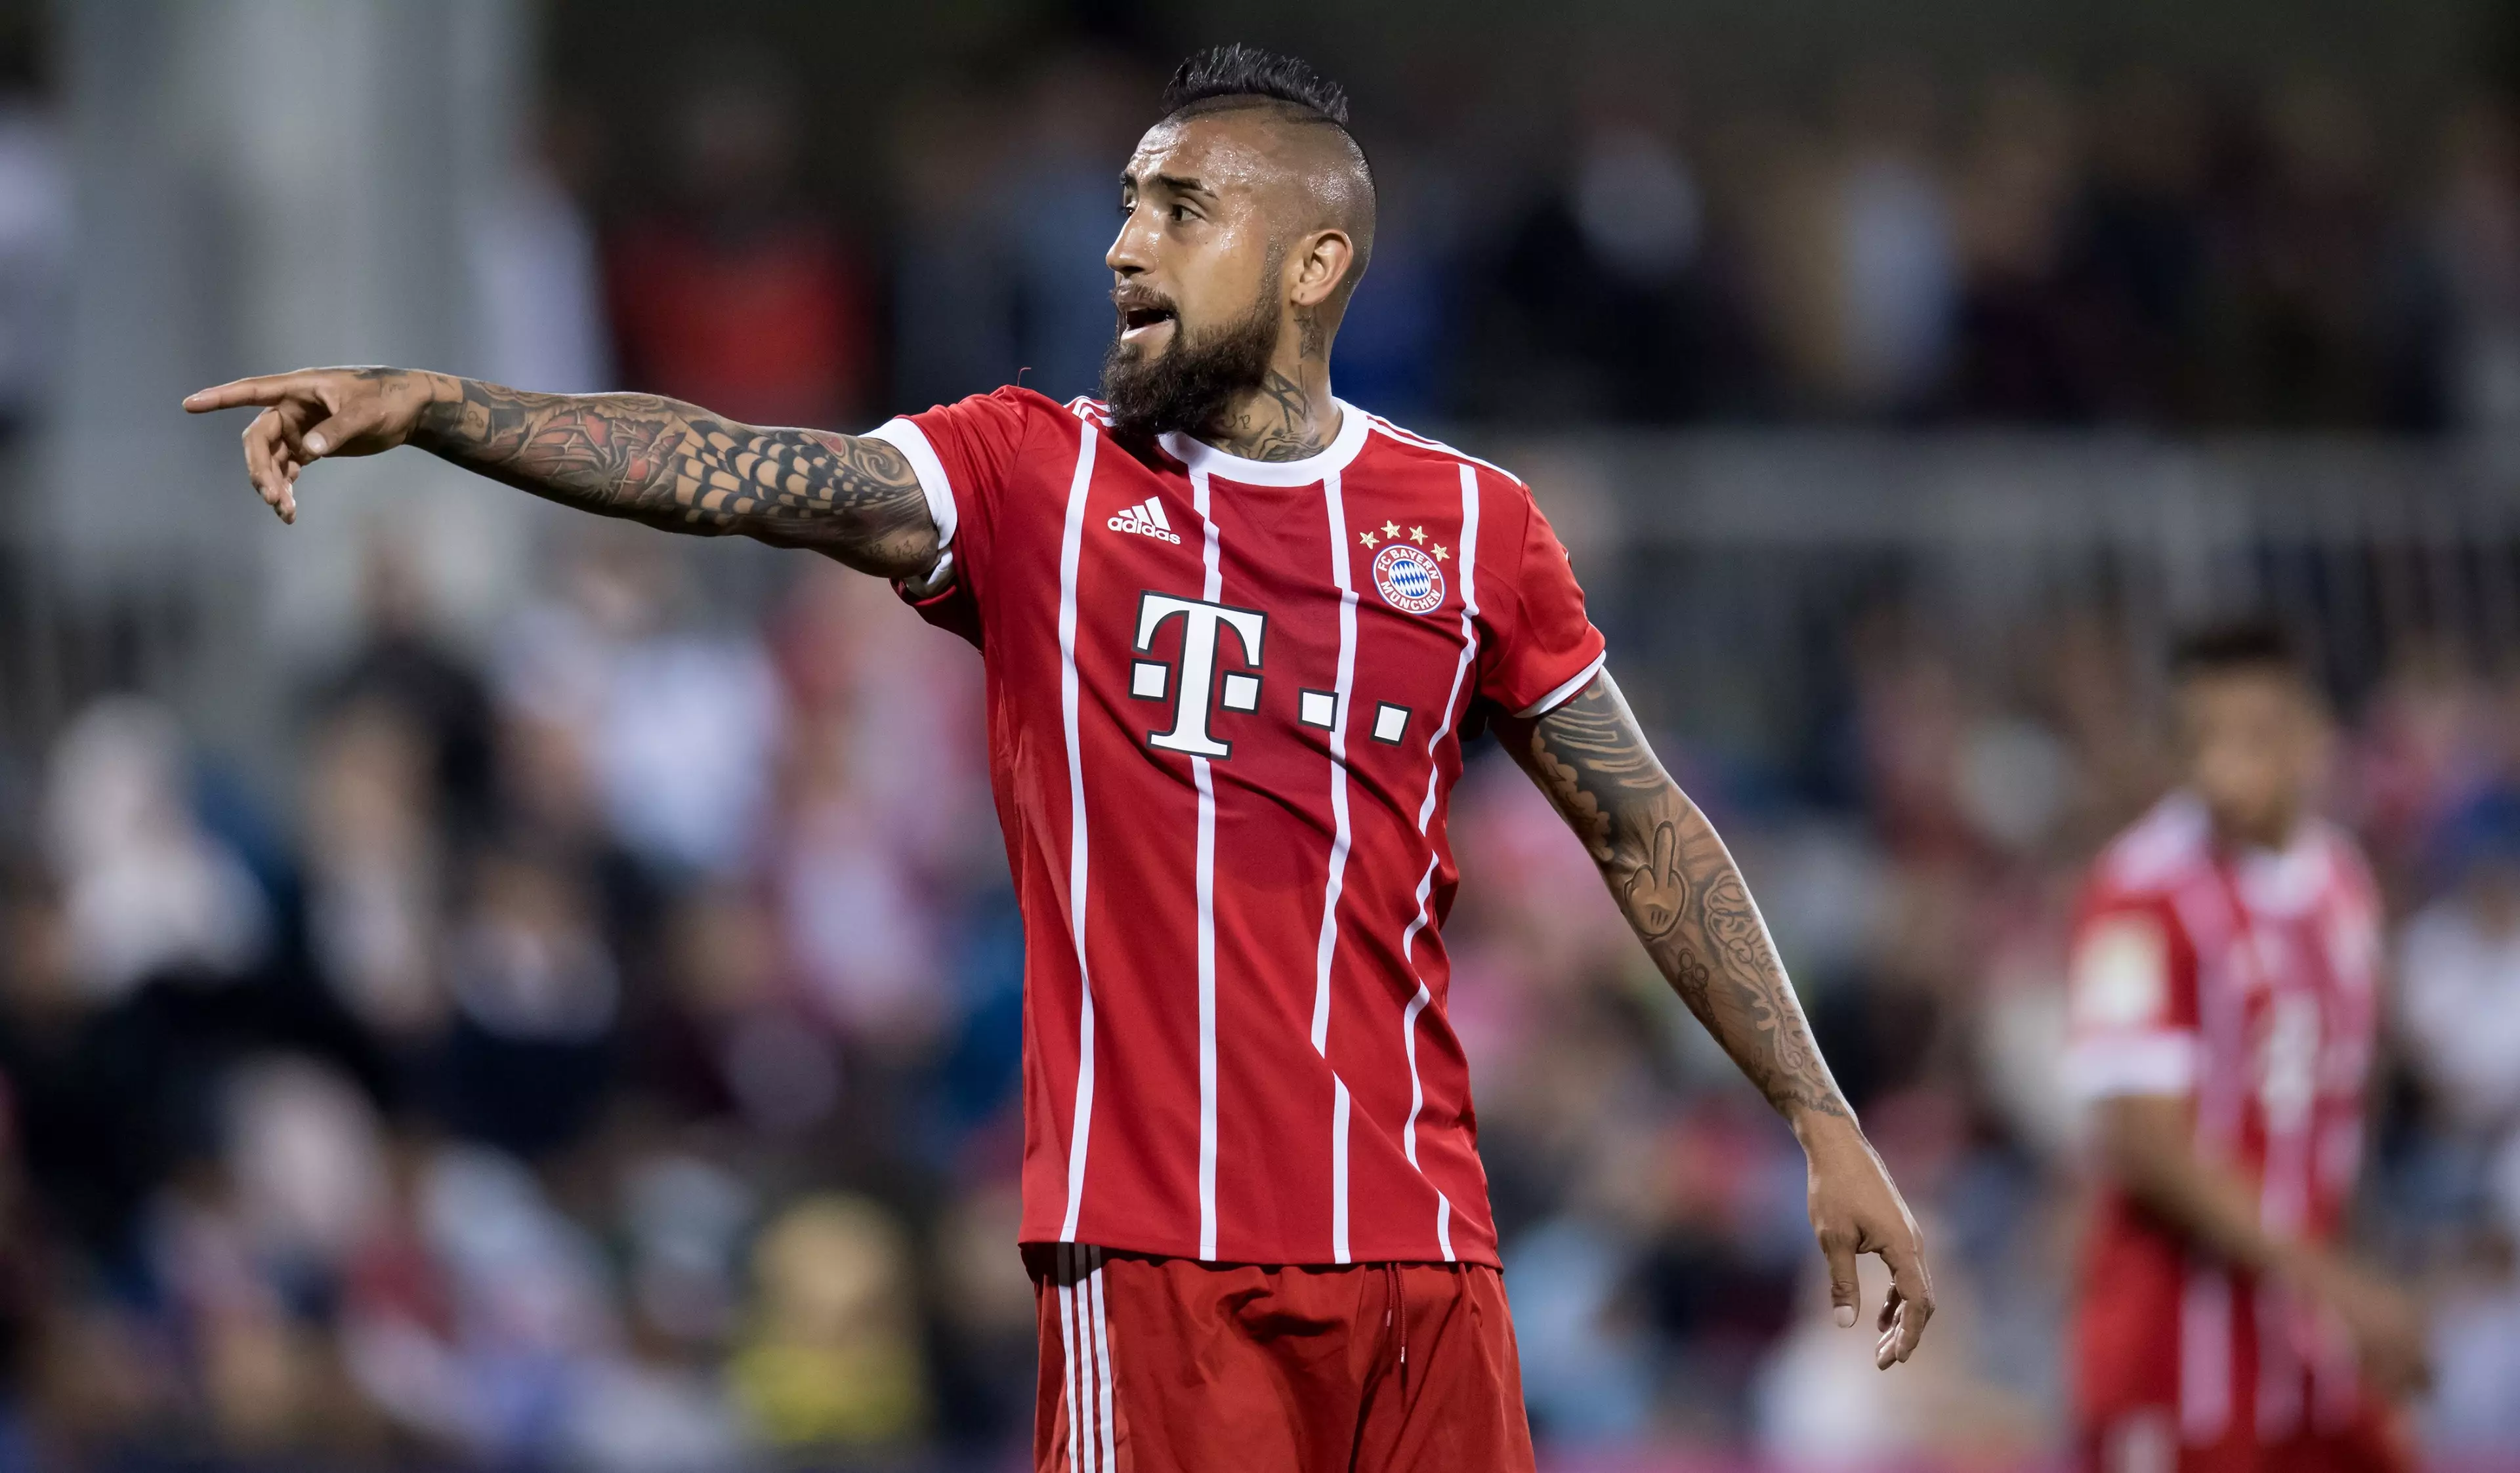 Vidal in action for Bayern Munich. Image: PA